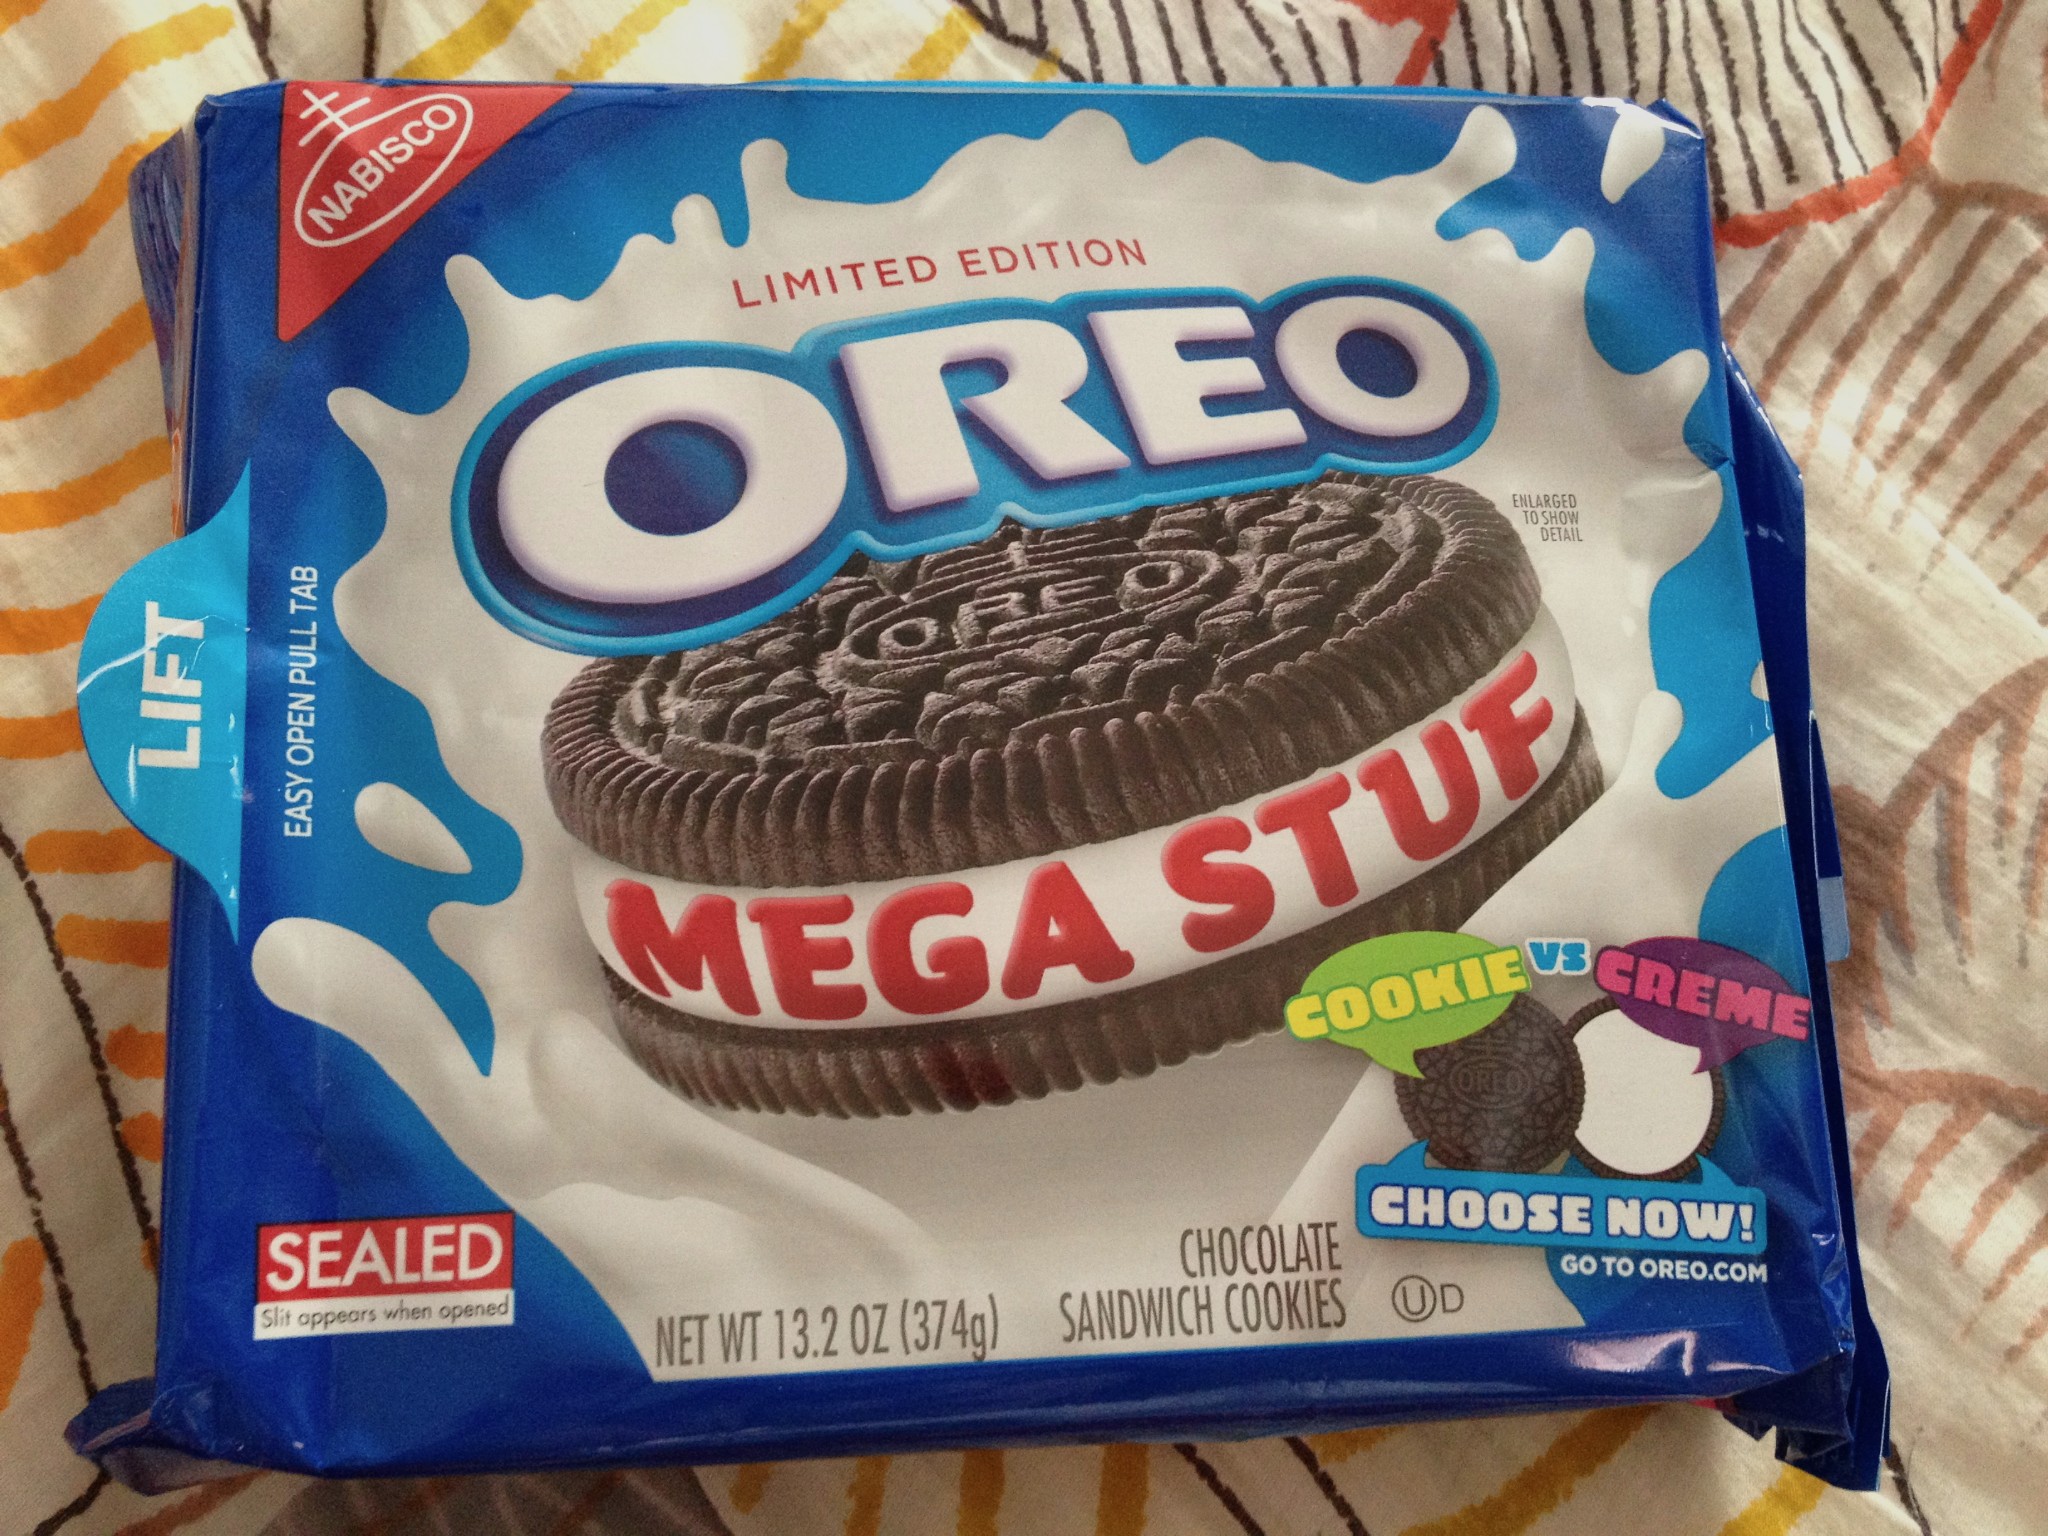 food blog, food review, oreo review, double stuf oreo, food blogger, fashion blog, fashion blogger, style blog, style blogger, mens fashion, mens fashion blog, mens style, mens style blog, womens style blog, anthropologie ootd blog, anthropologie ootd, anthropologie, ootd, mens ootd, womens ootd, 